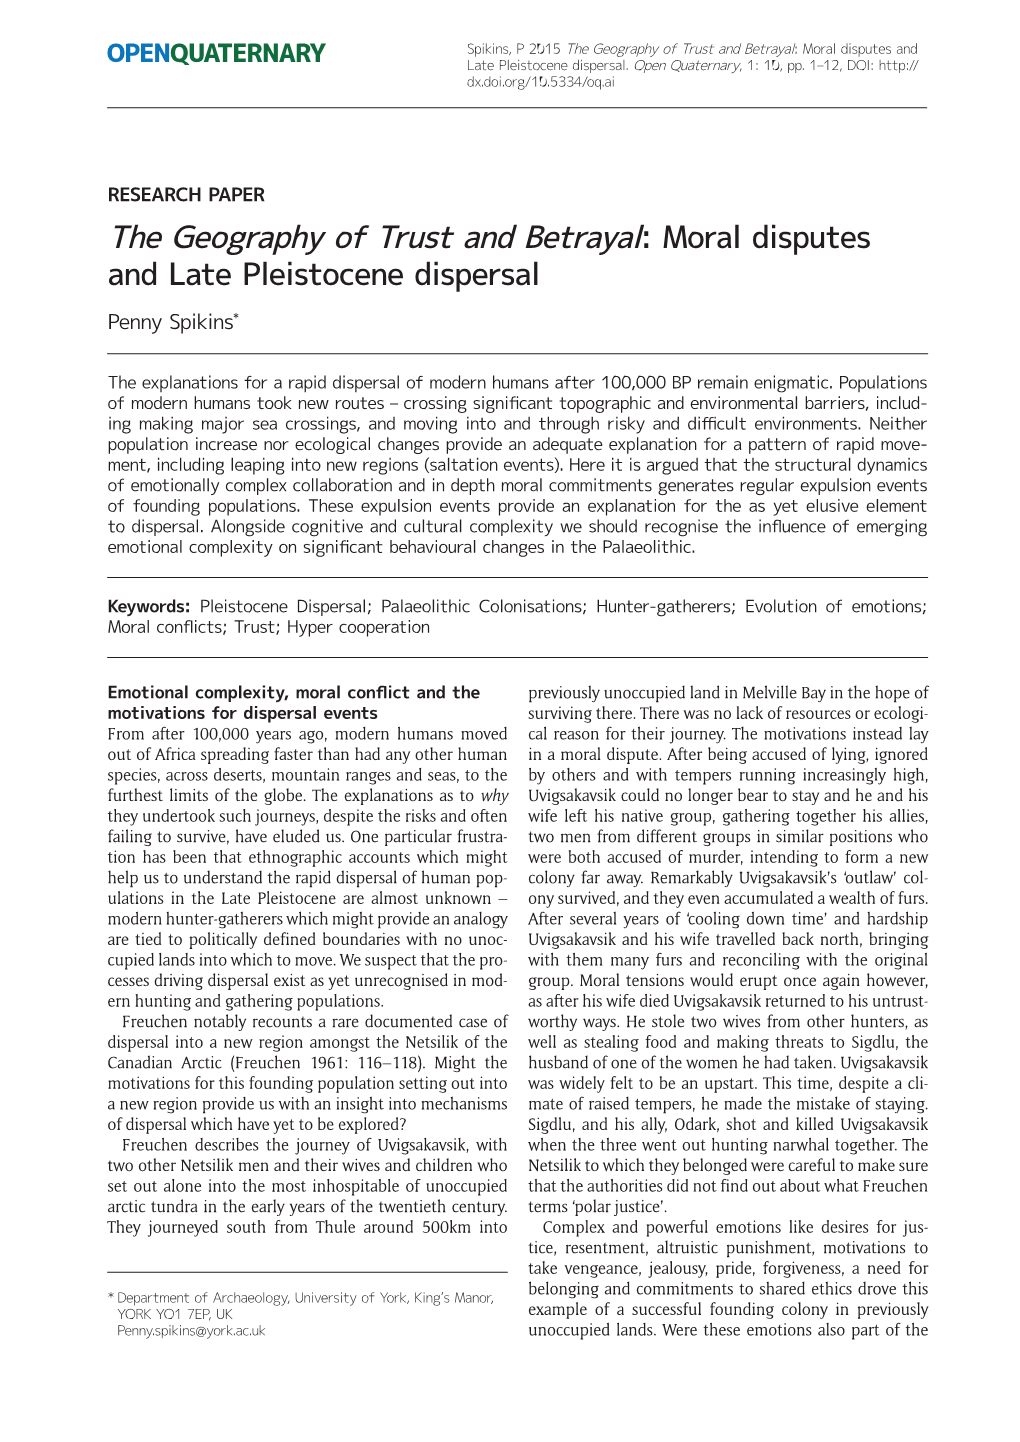 The Geography of Trust and Betrayal: Moral Disputes and Late Pleistocene Dispersal